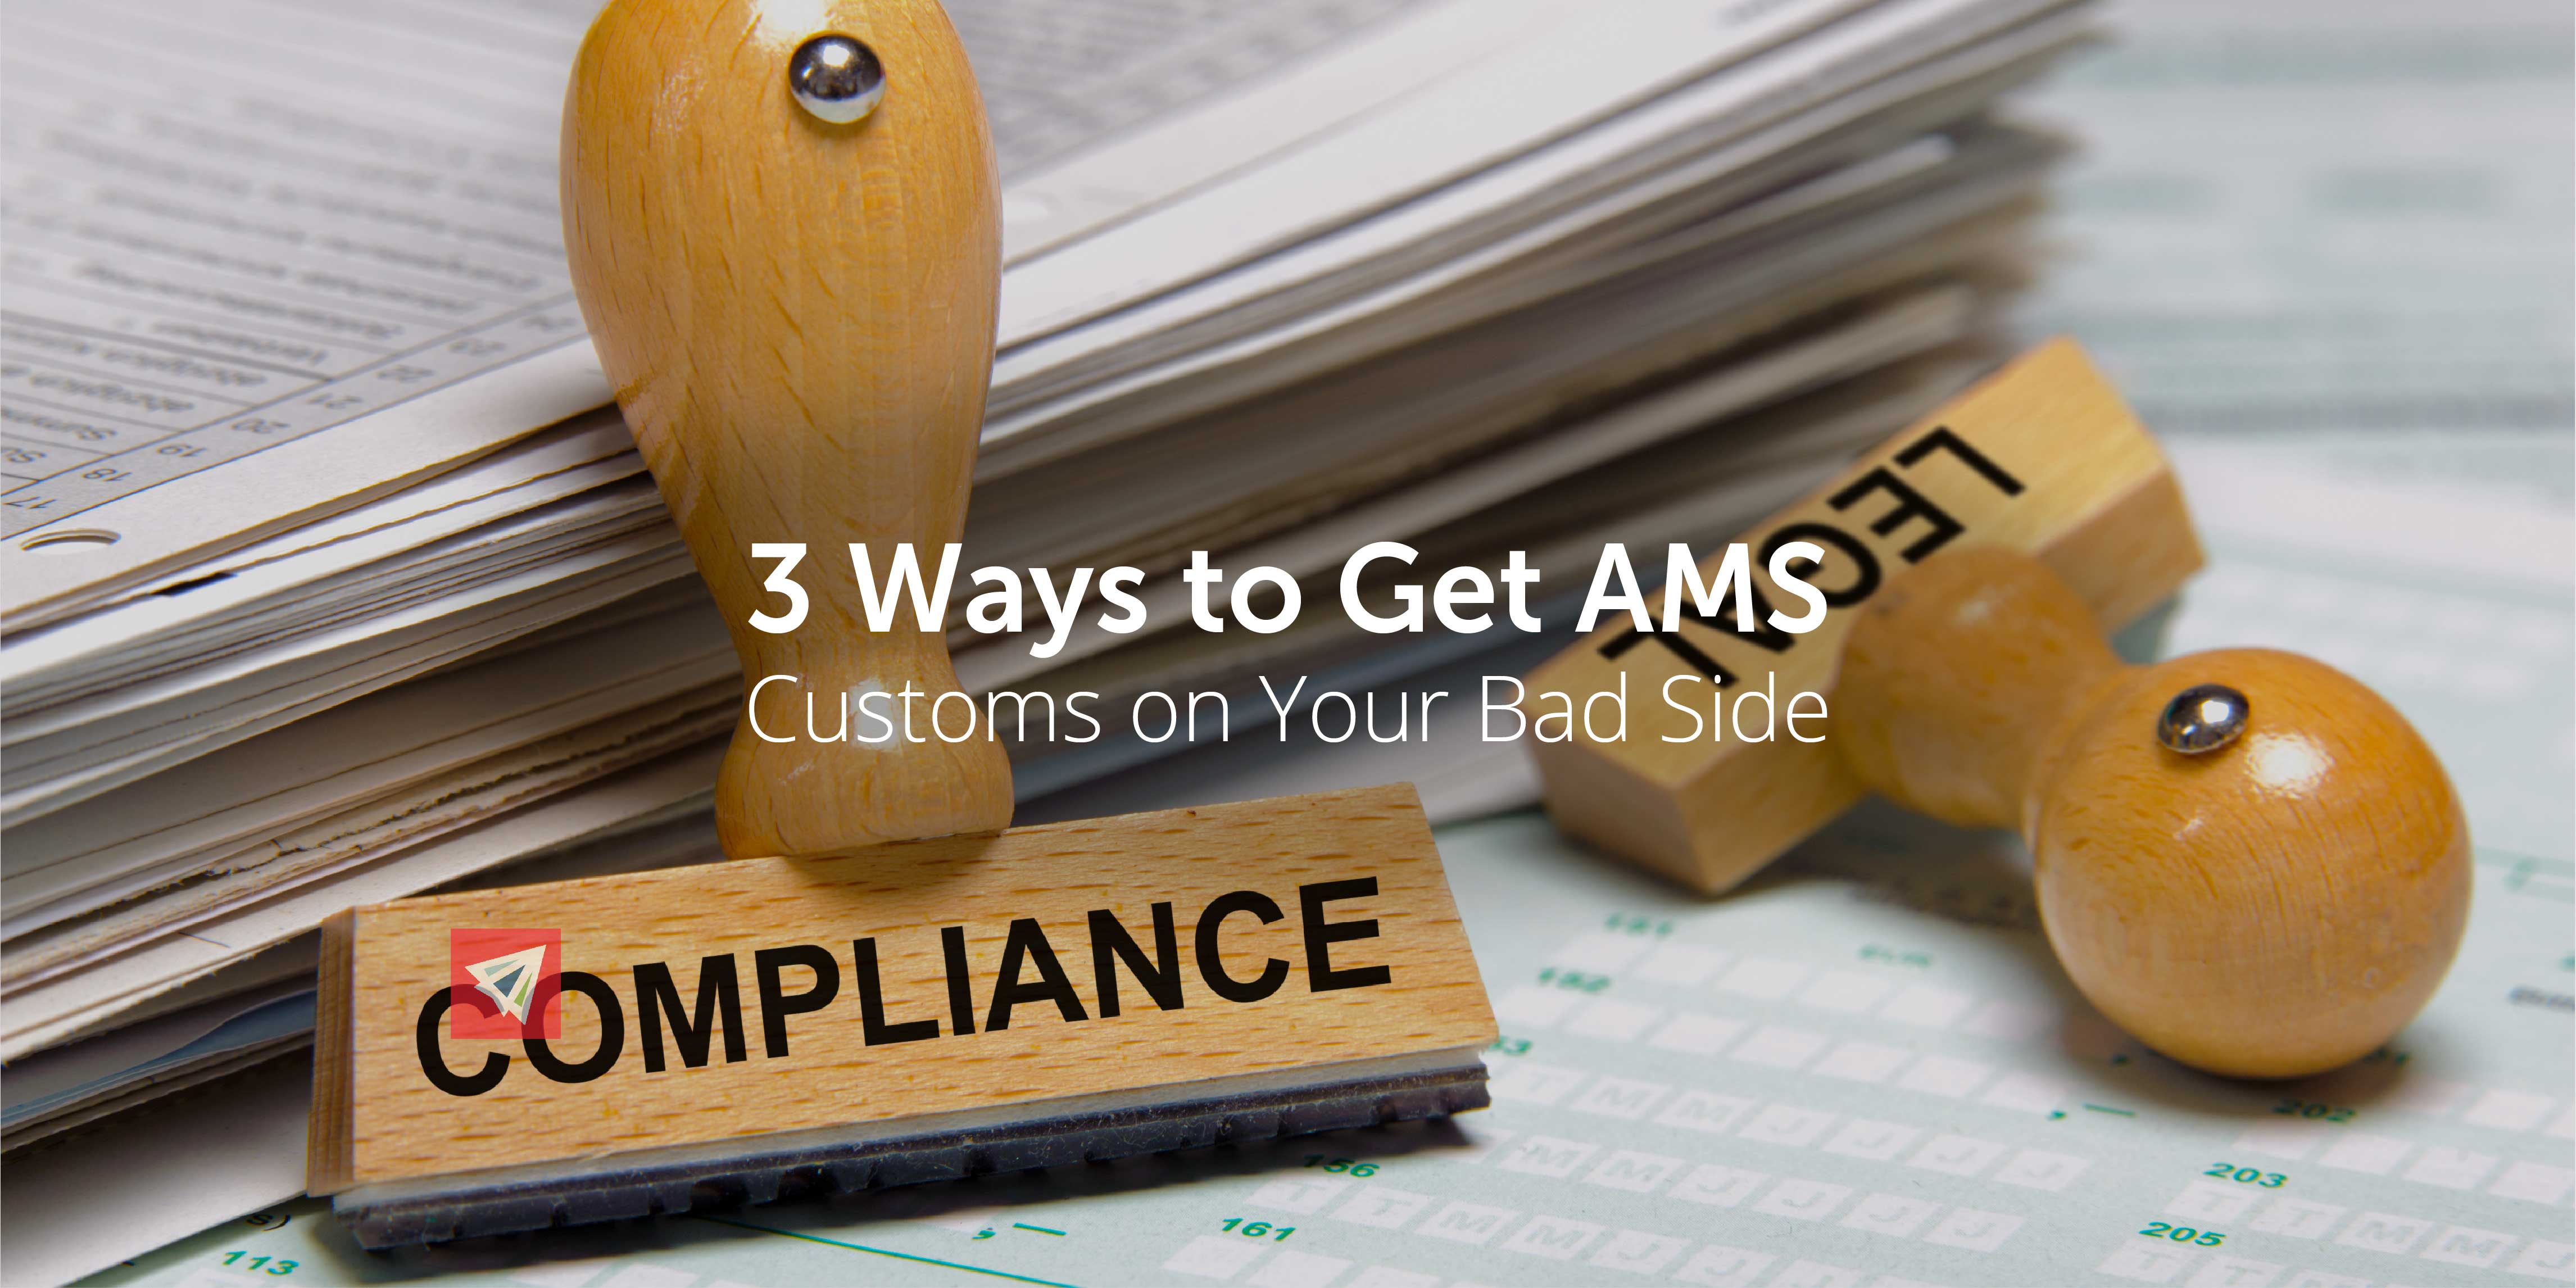 3 Ways to Get AMS Customs on Your Bad Side